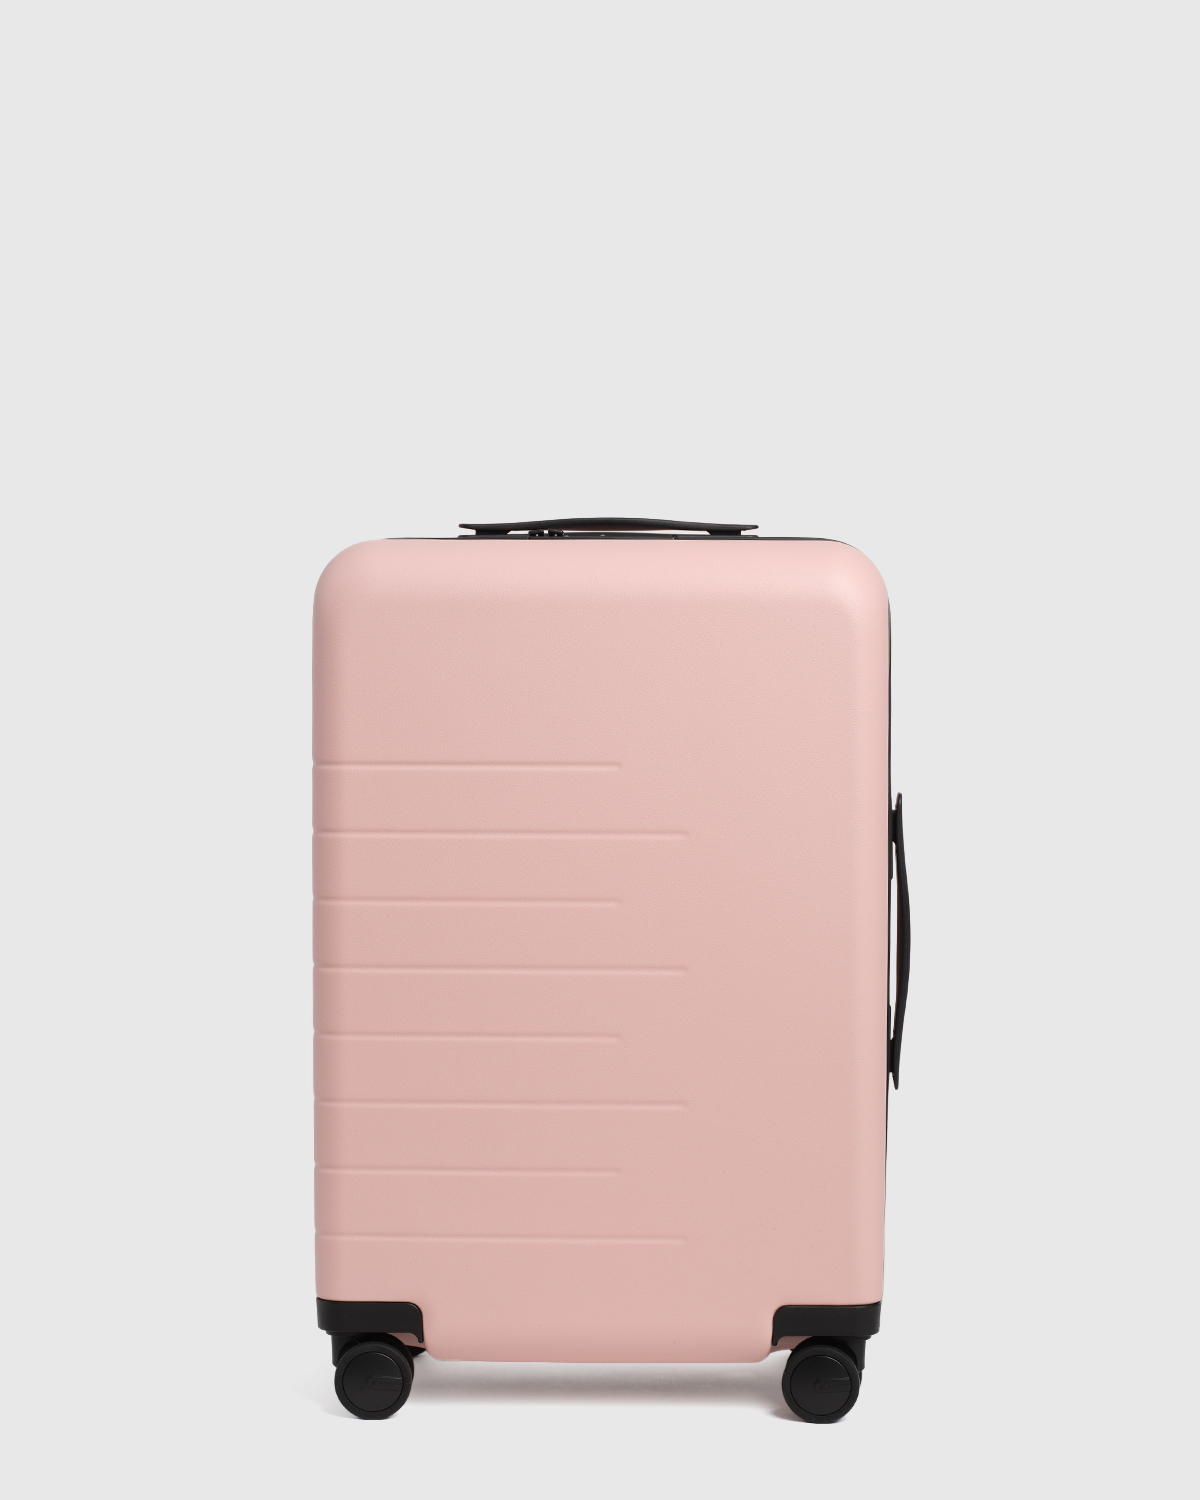 Quince Carry-on Hard Shell Suitcase 21" In Light Pink